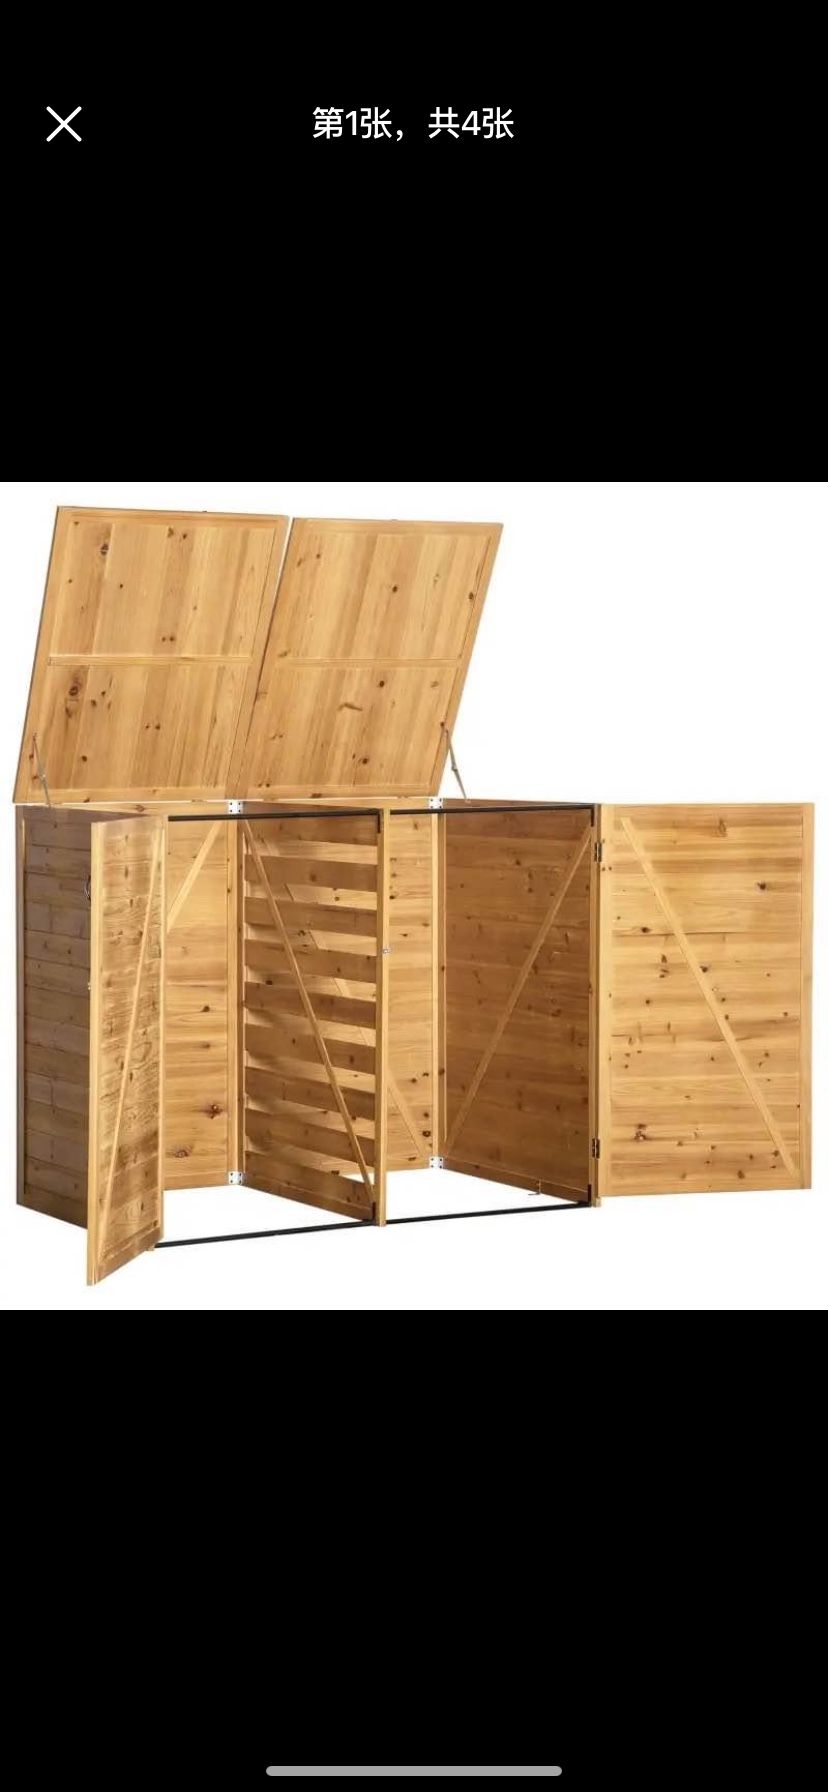 Outsunny 5' x 3' 2 Garbage Can Shed, Wood Storage Shed 